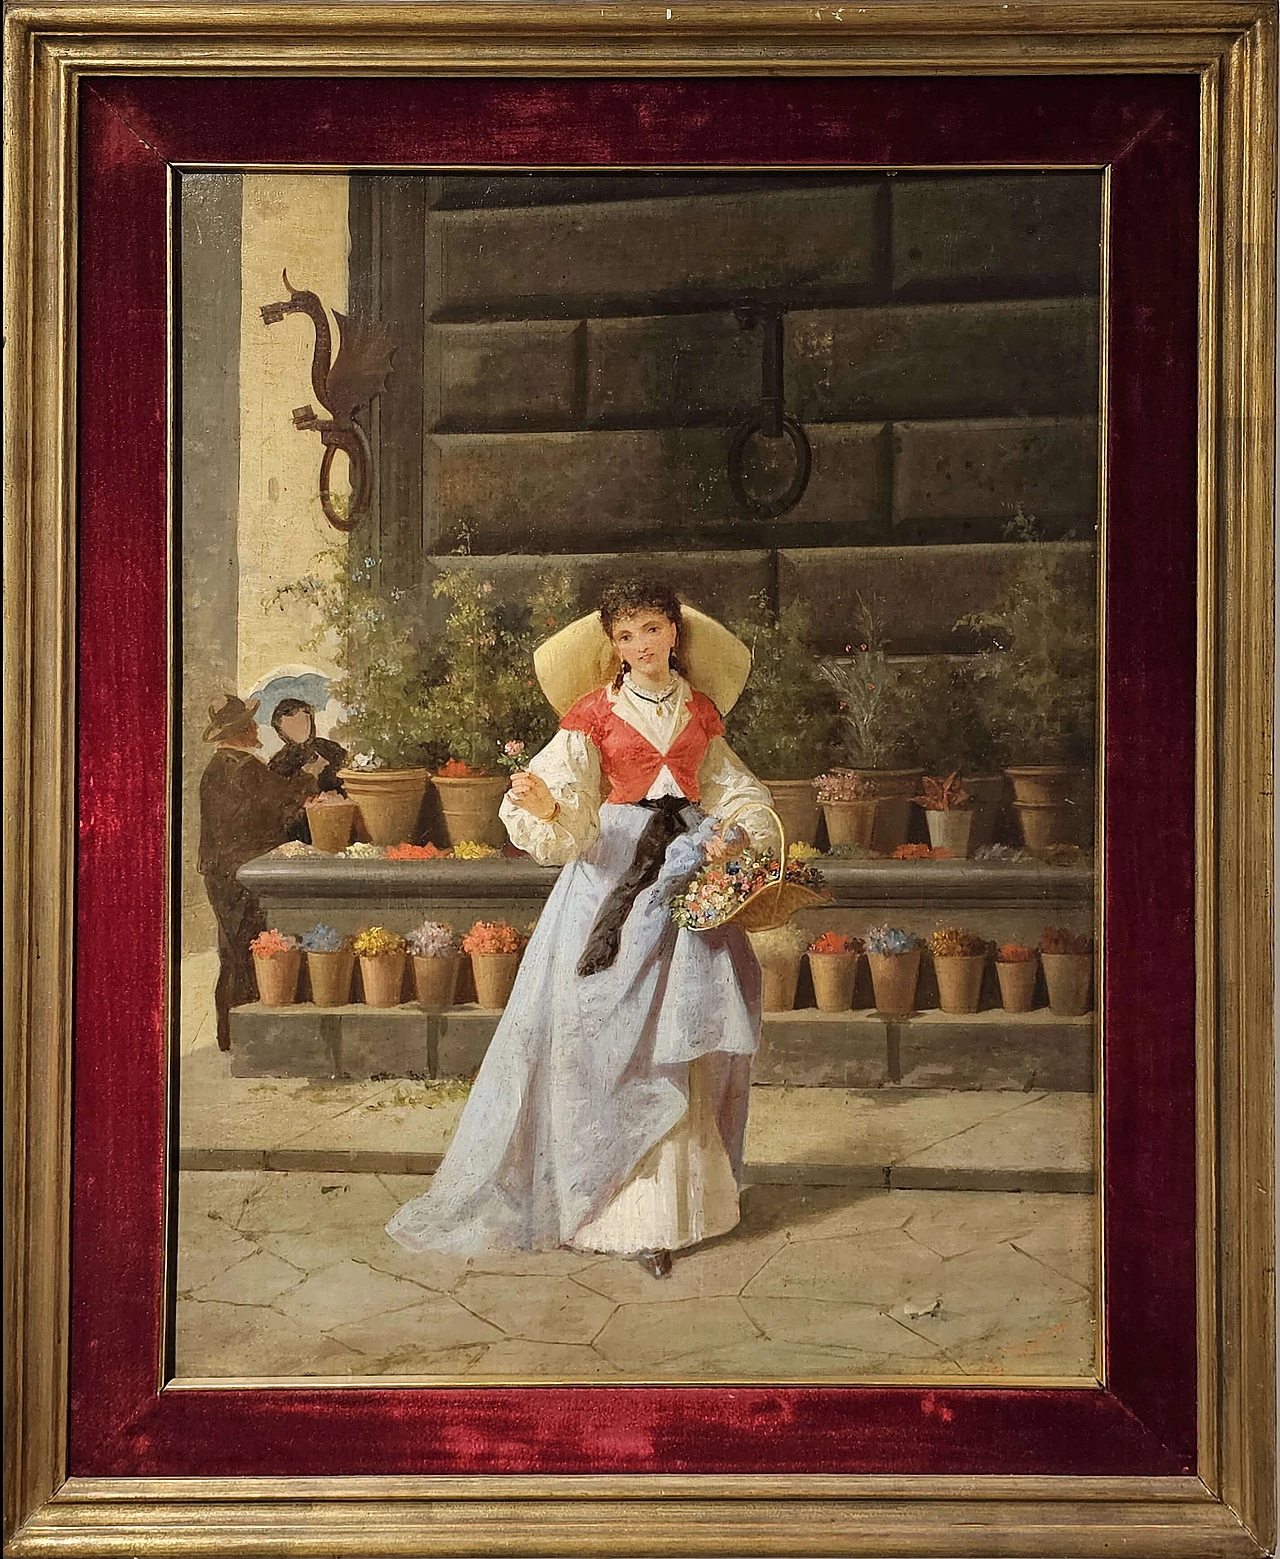 Enrico Fanfani, flower girl at Palazzo Strozzi, oil painting on canvas, 19th century 14